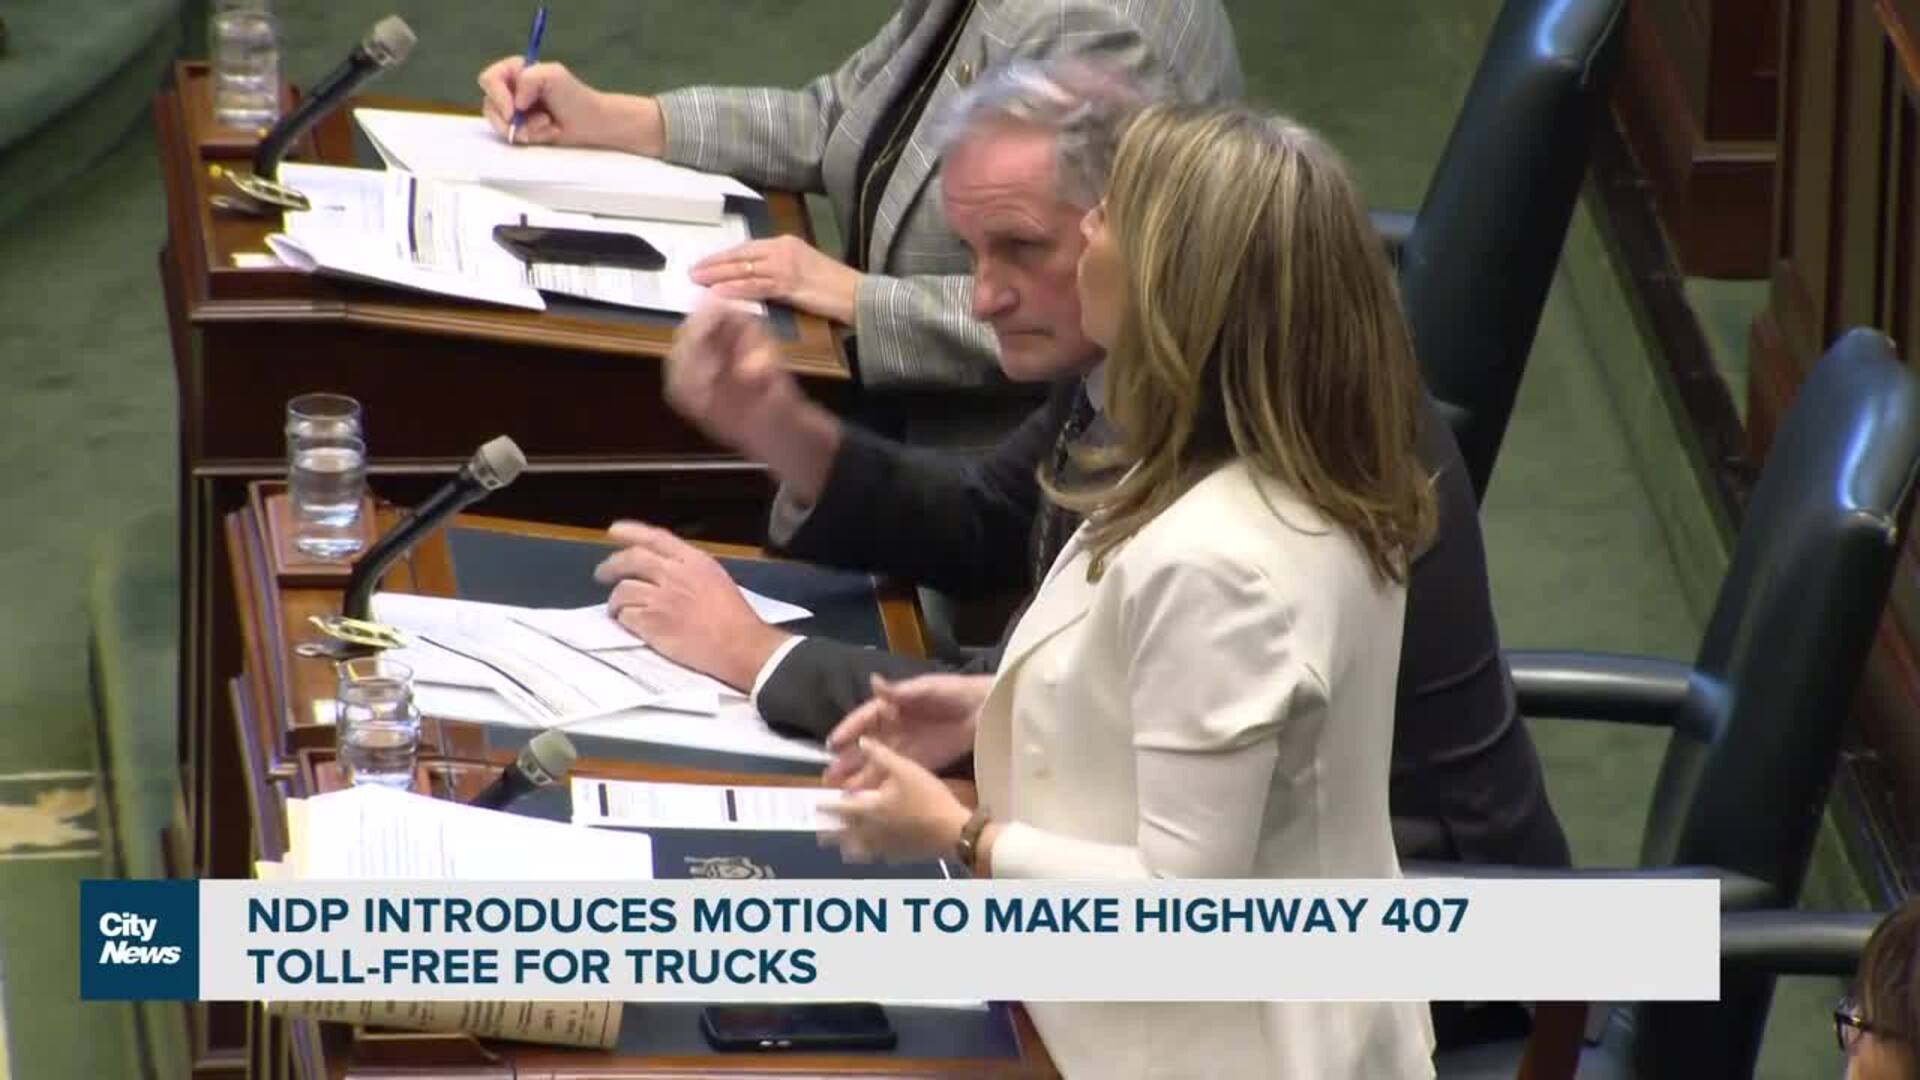 NDP proposes removing Highway 407 tolls for commercial trucks